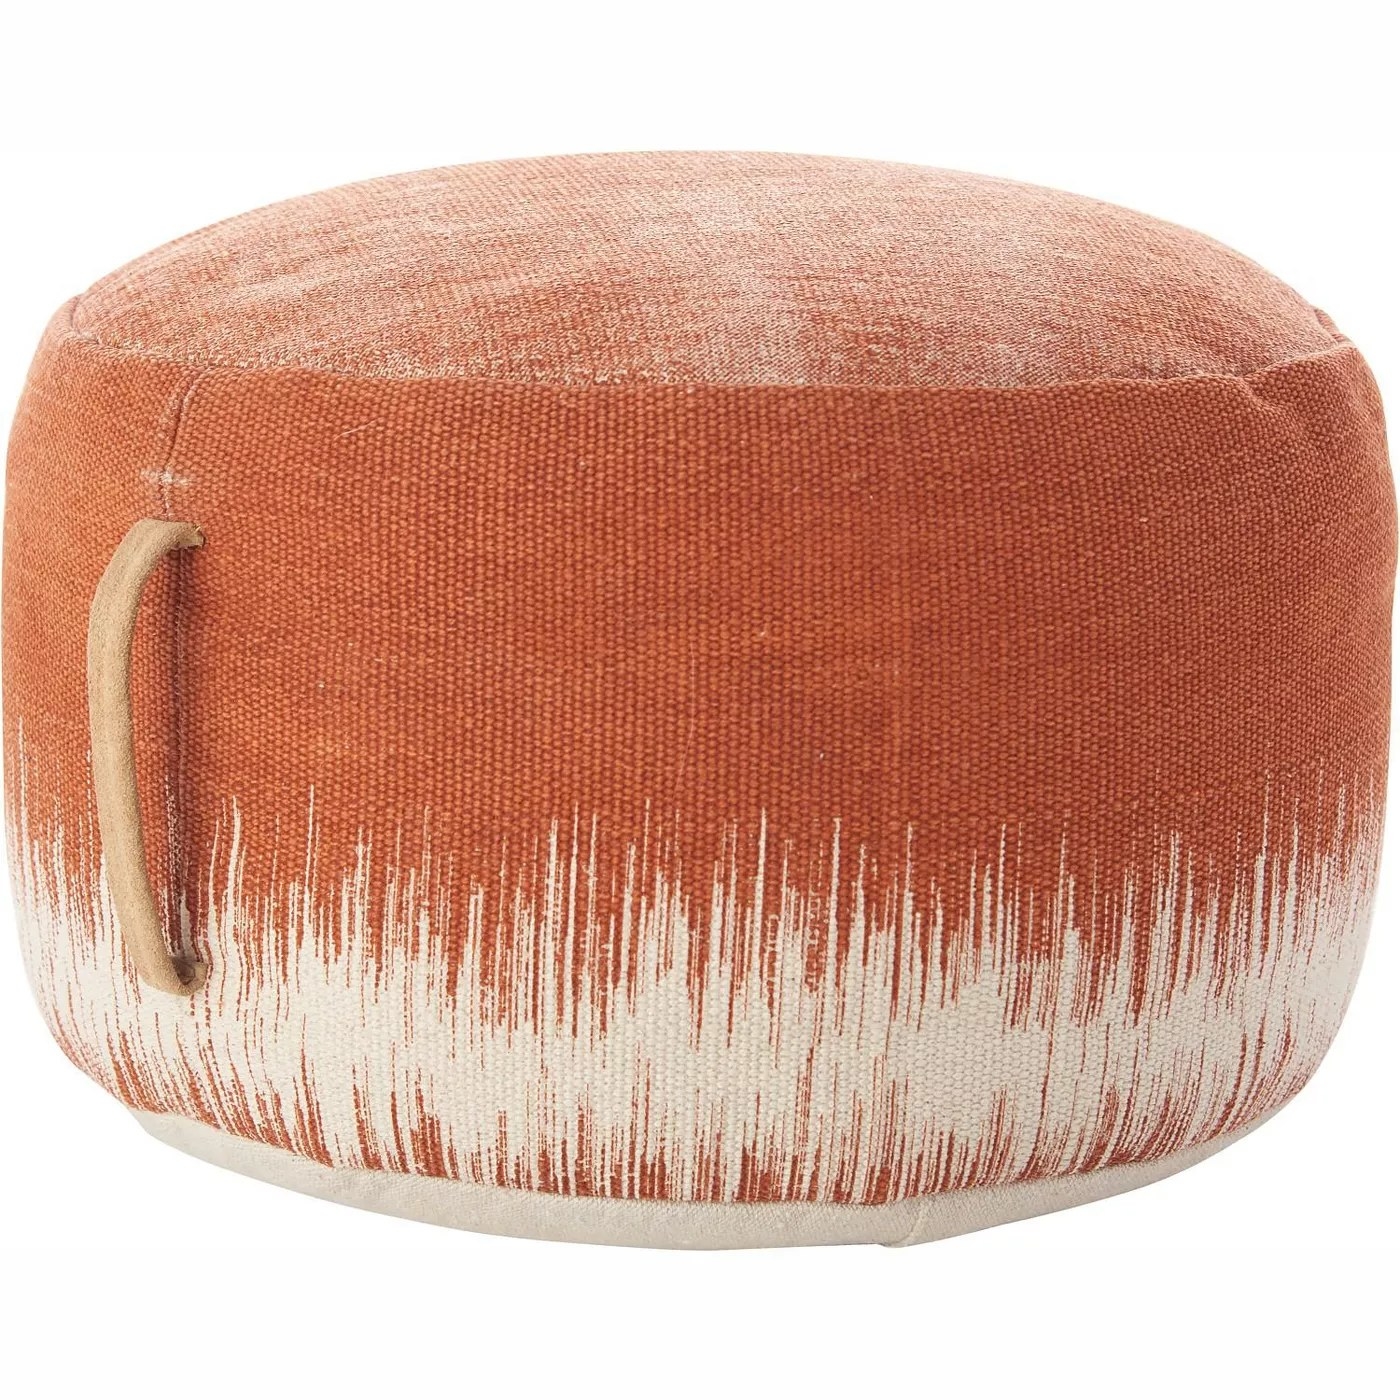 A clay-colored pouf with a white soundwave design and a handle